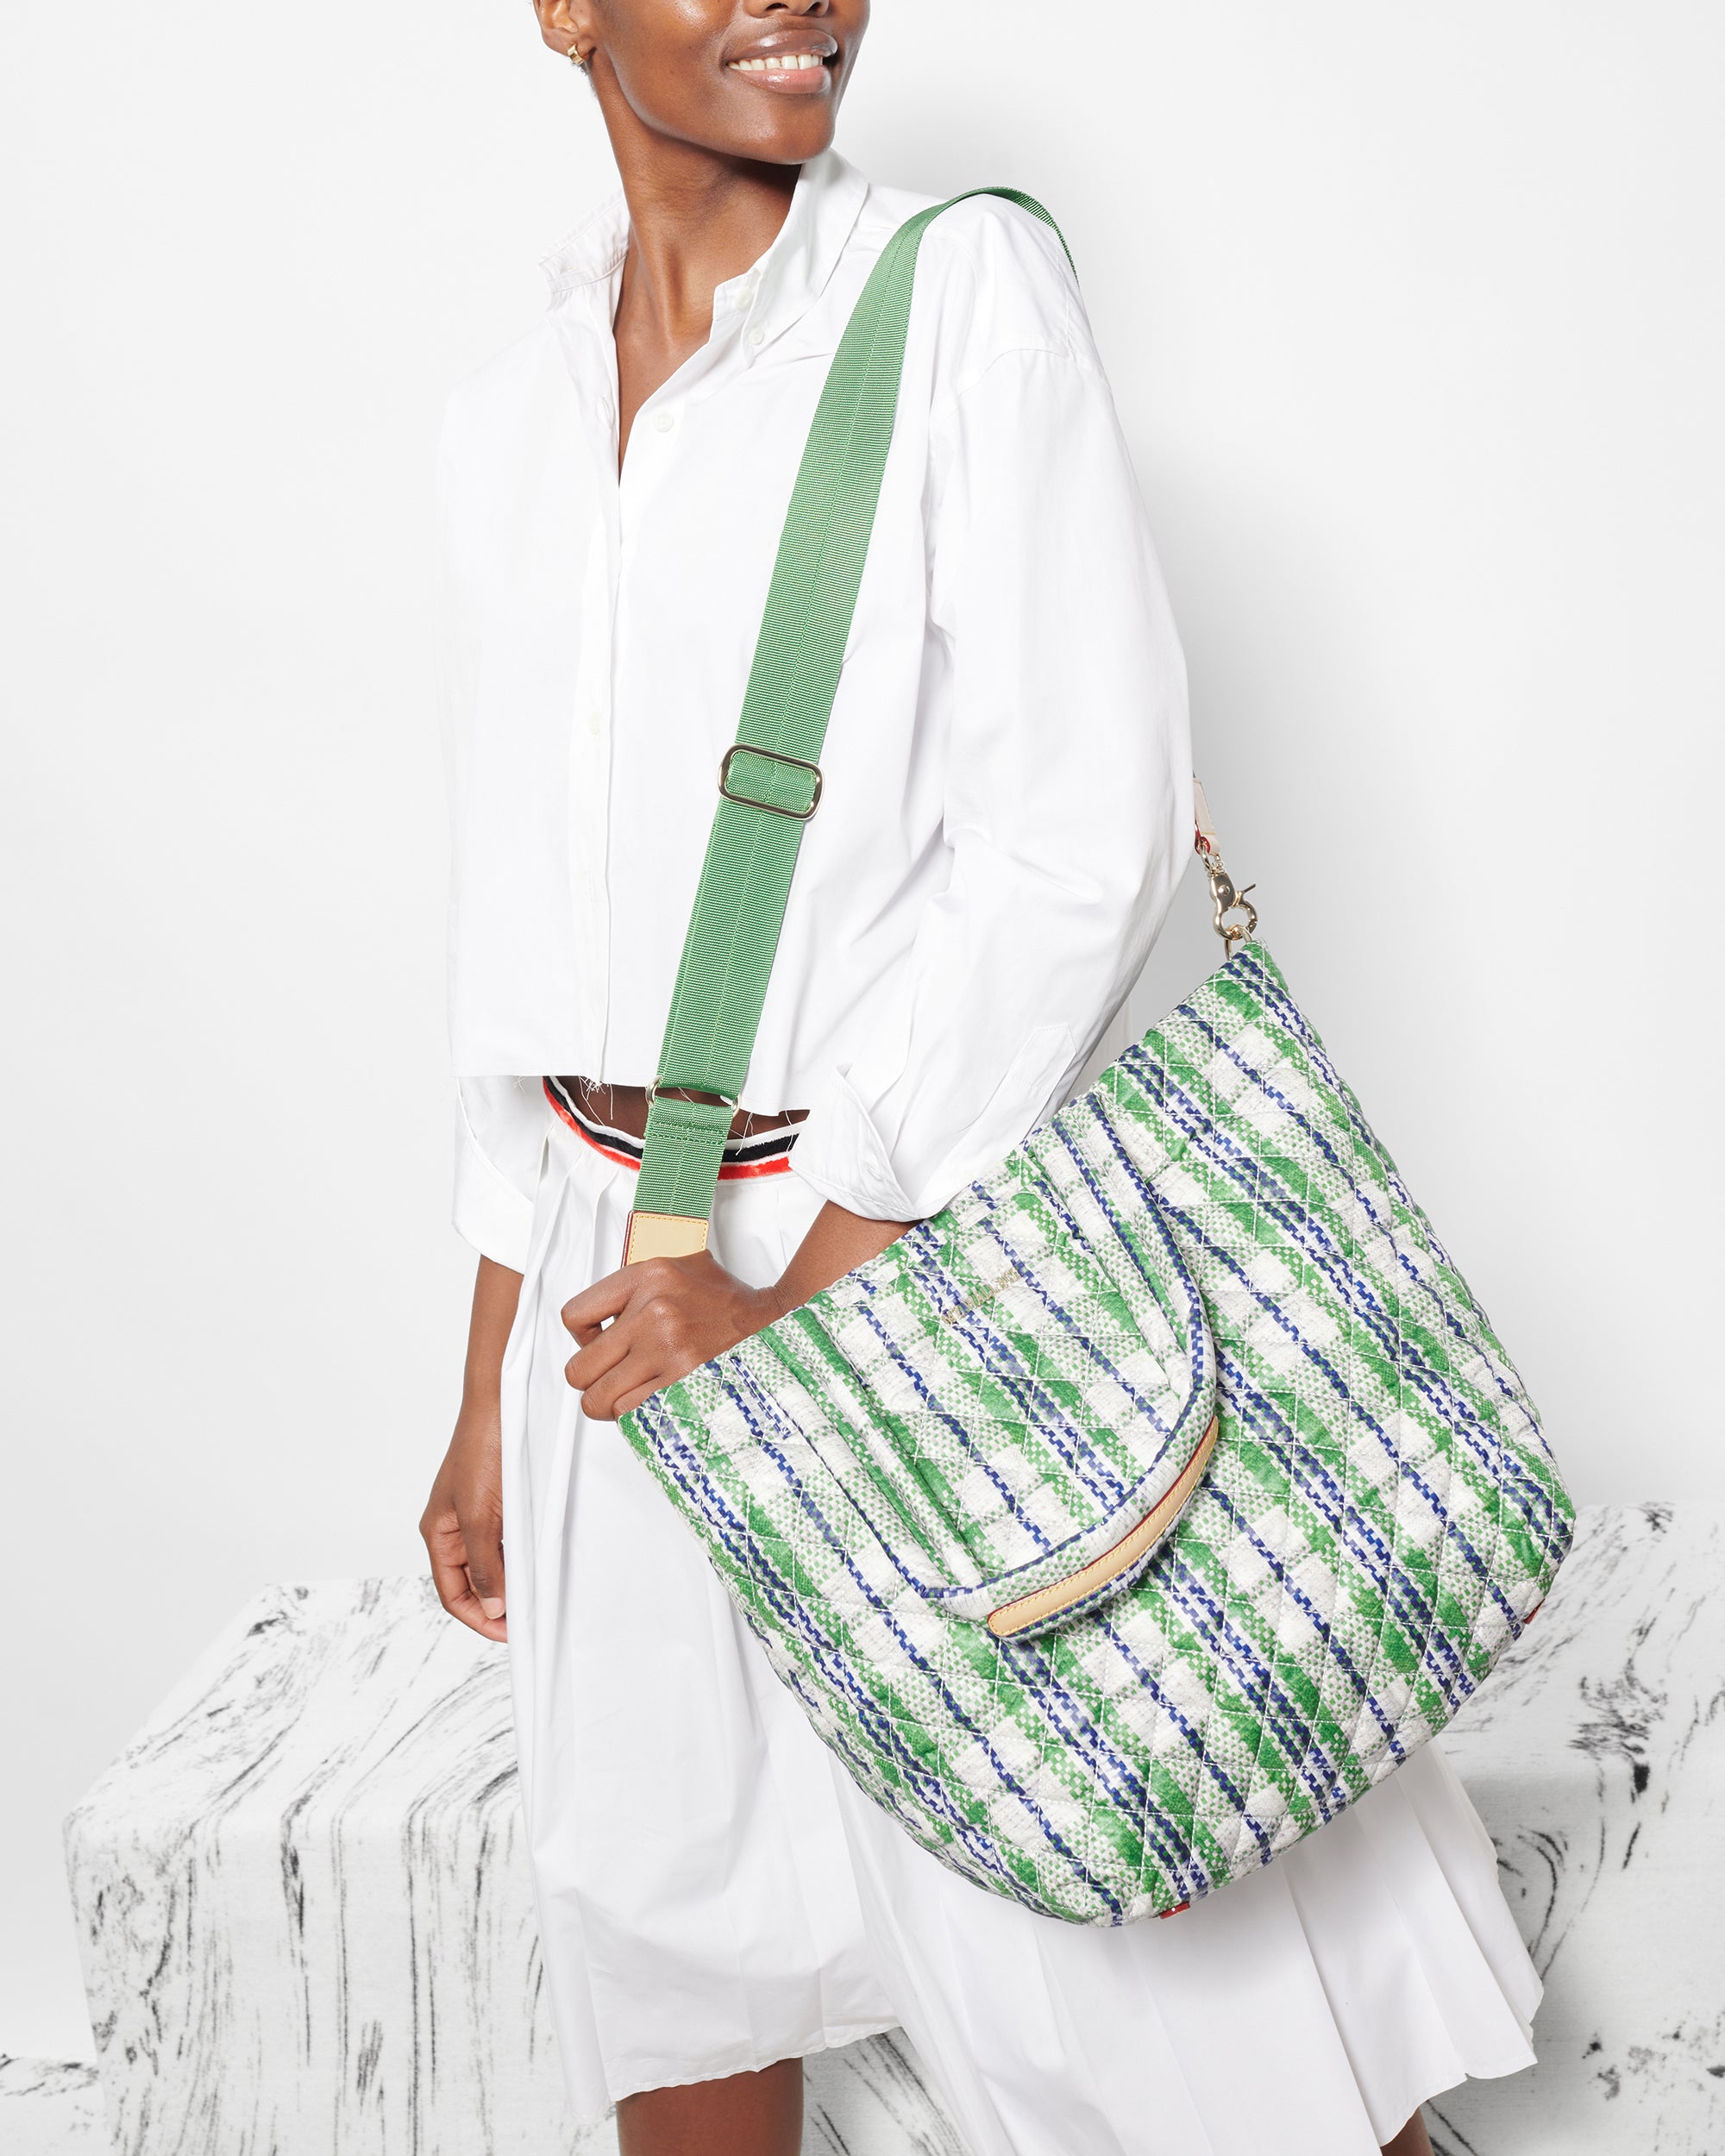 Stylish Totes for Travel: MZ Wallace Metro Tote - Styled by Science